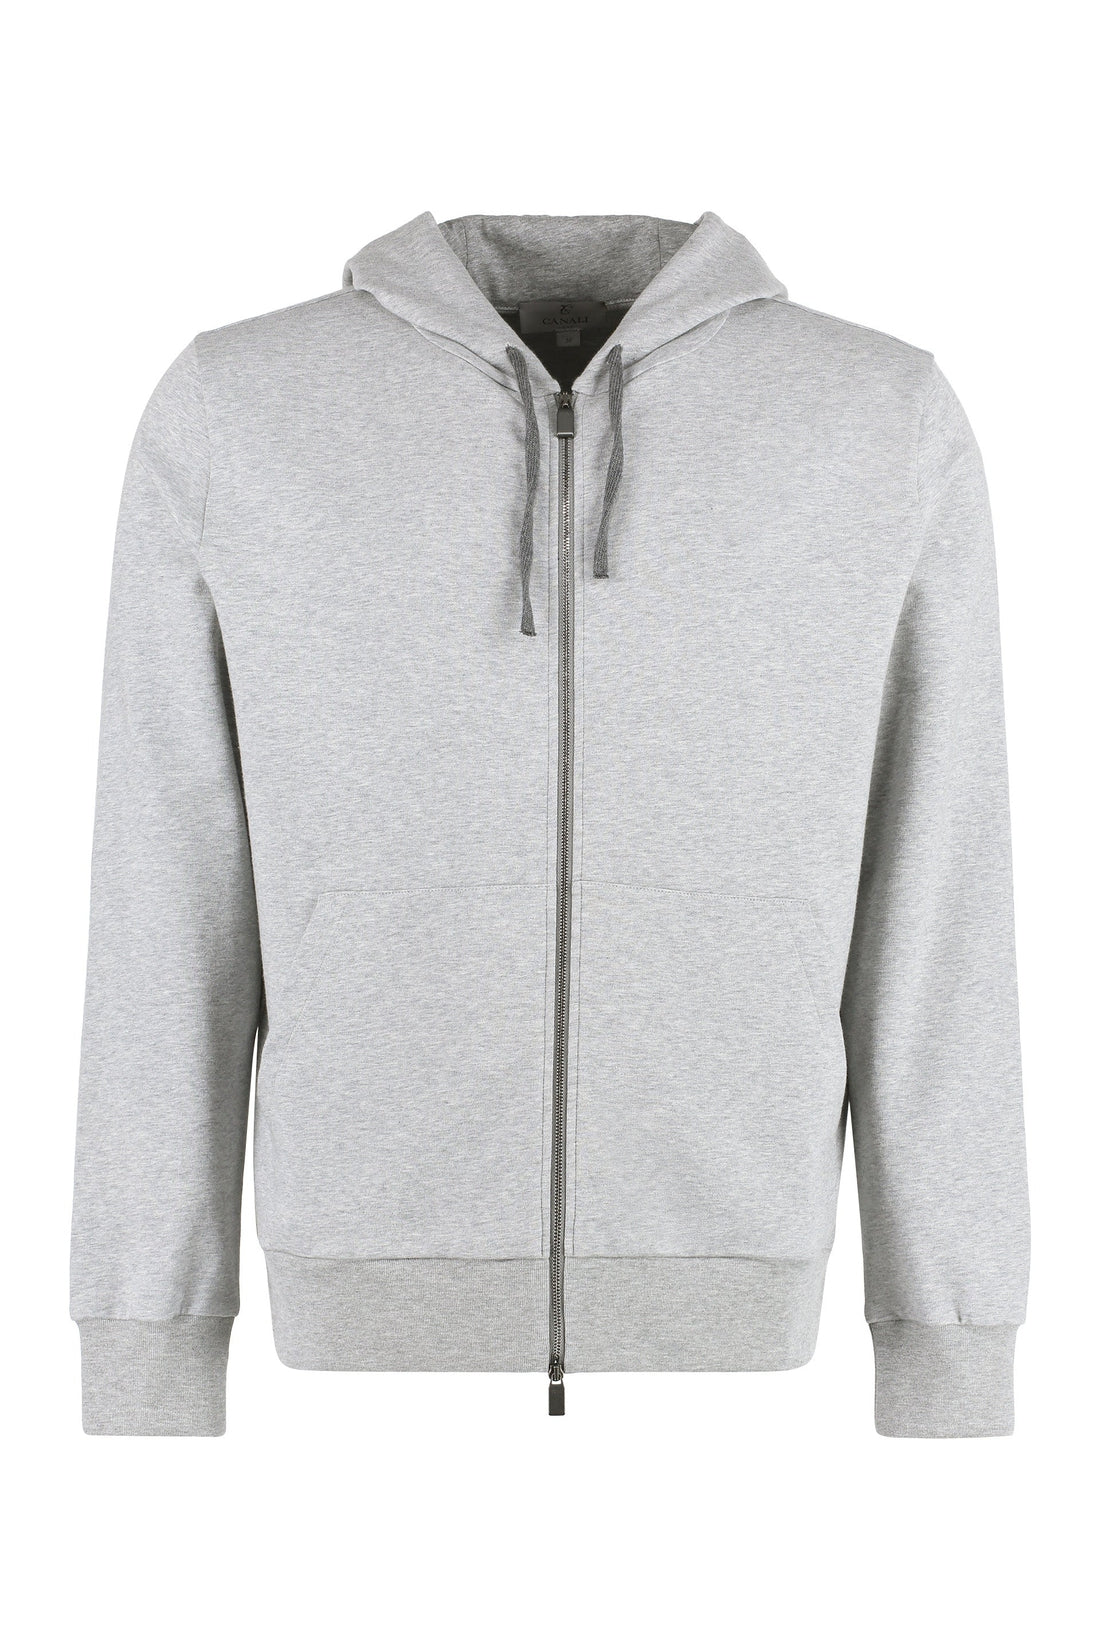 Canali-OUTLET-SALE-Full zip hoodie-ARCHIVIST